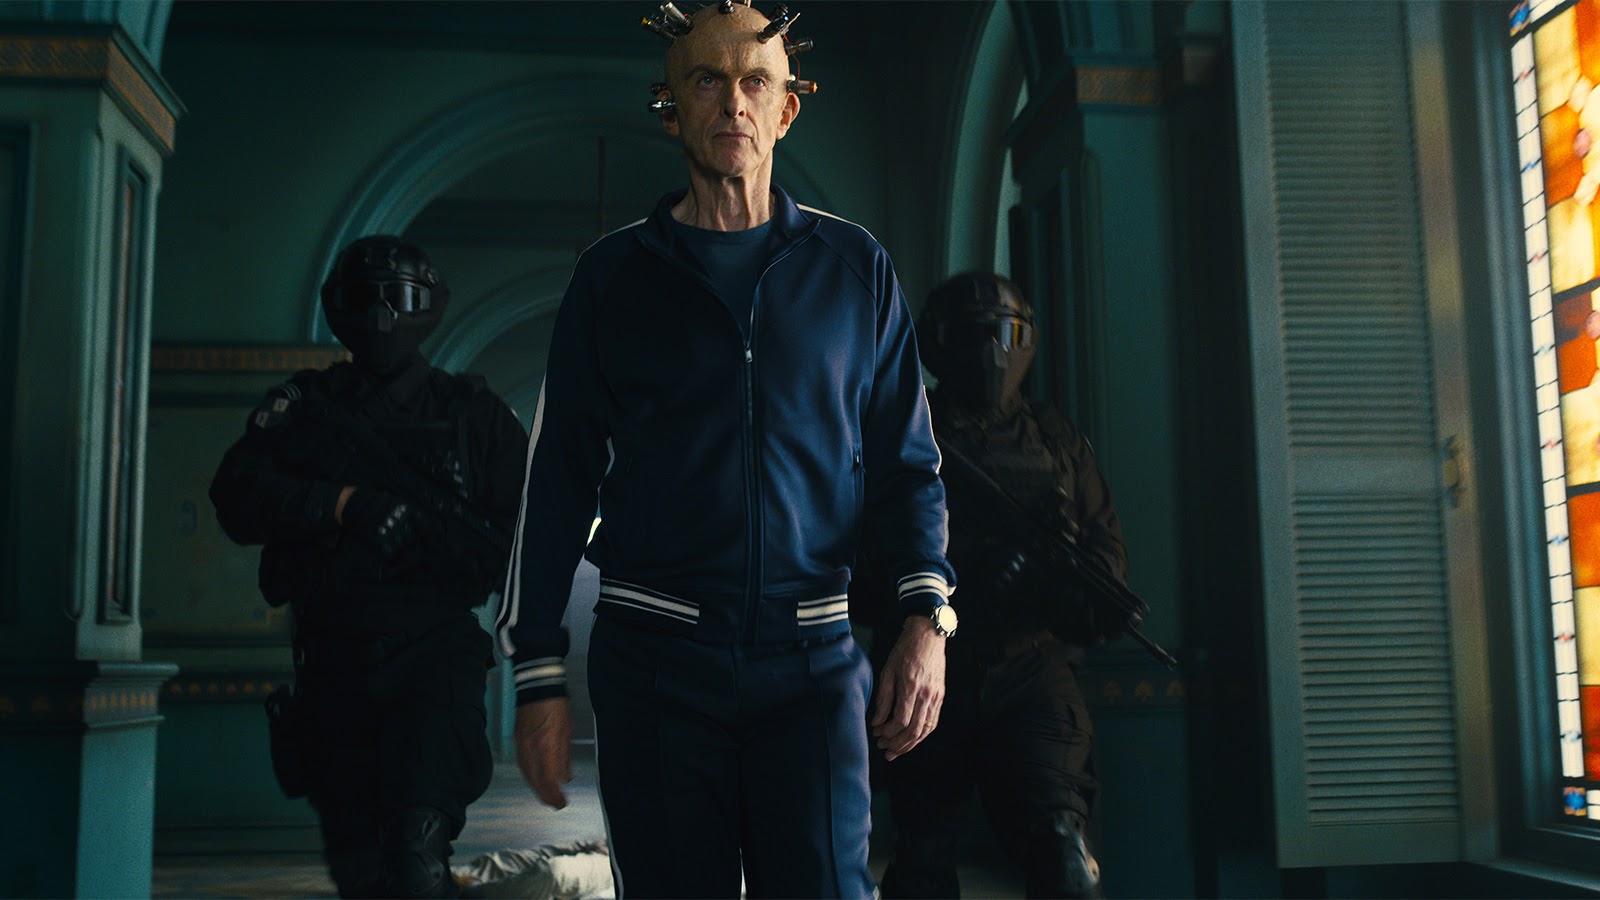 Peter Capaldi rockin the tracksuit in The Suicide Squad. 